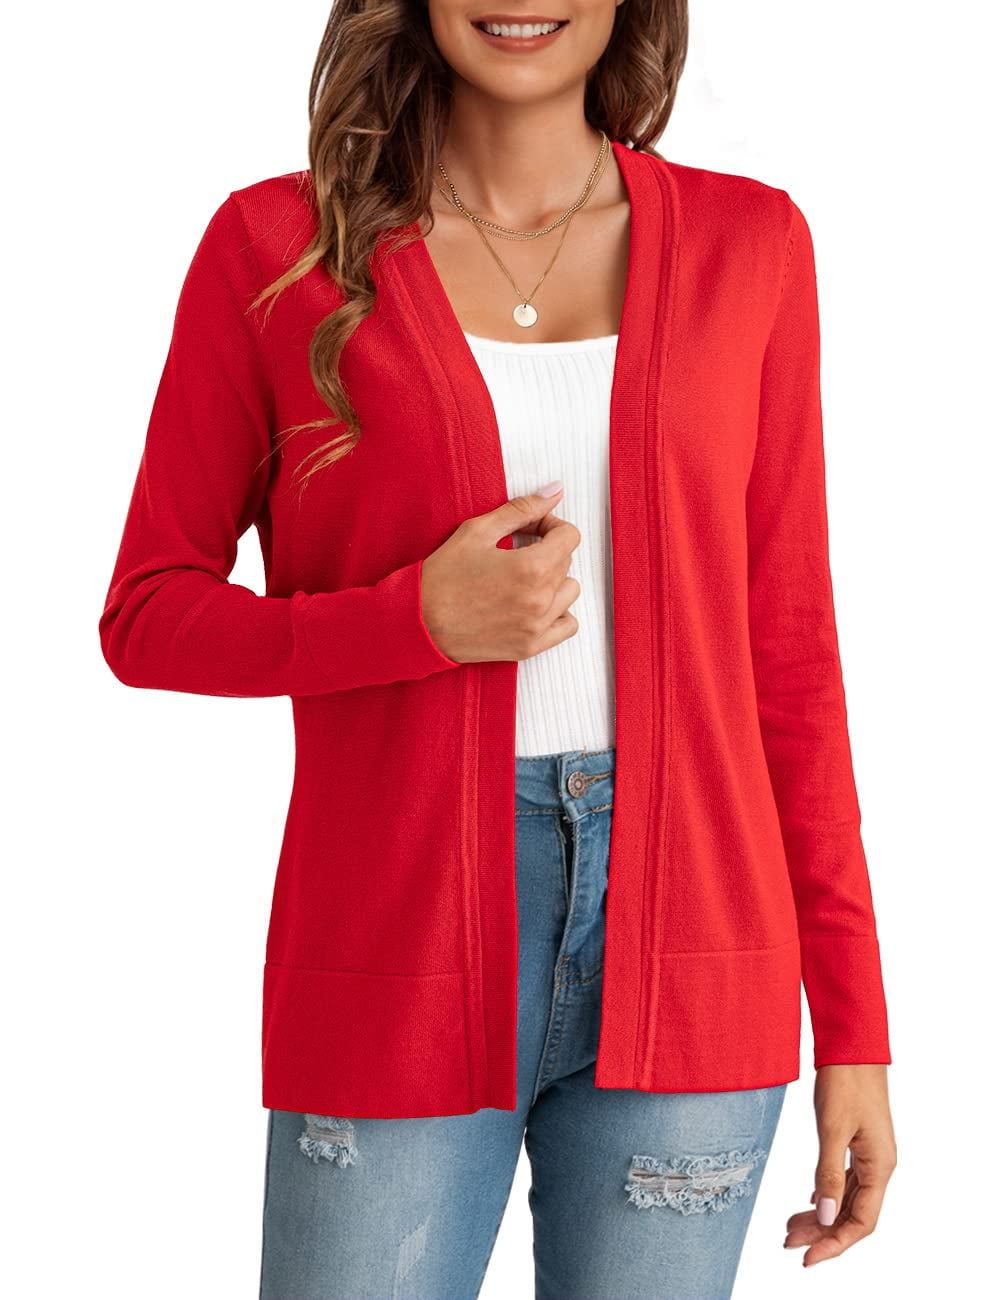 Wenini Clearance Light Cardigans for Women's Casual Lightweight Open Front  Cardigans Soft Draped Ruffles 3/4 Sleeve Cardigan # Flash Sales Today Deals  Prime Clearance Red XL 